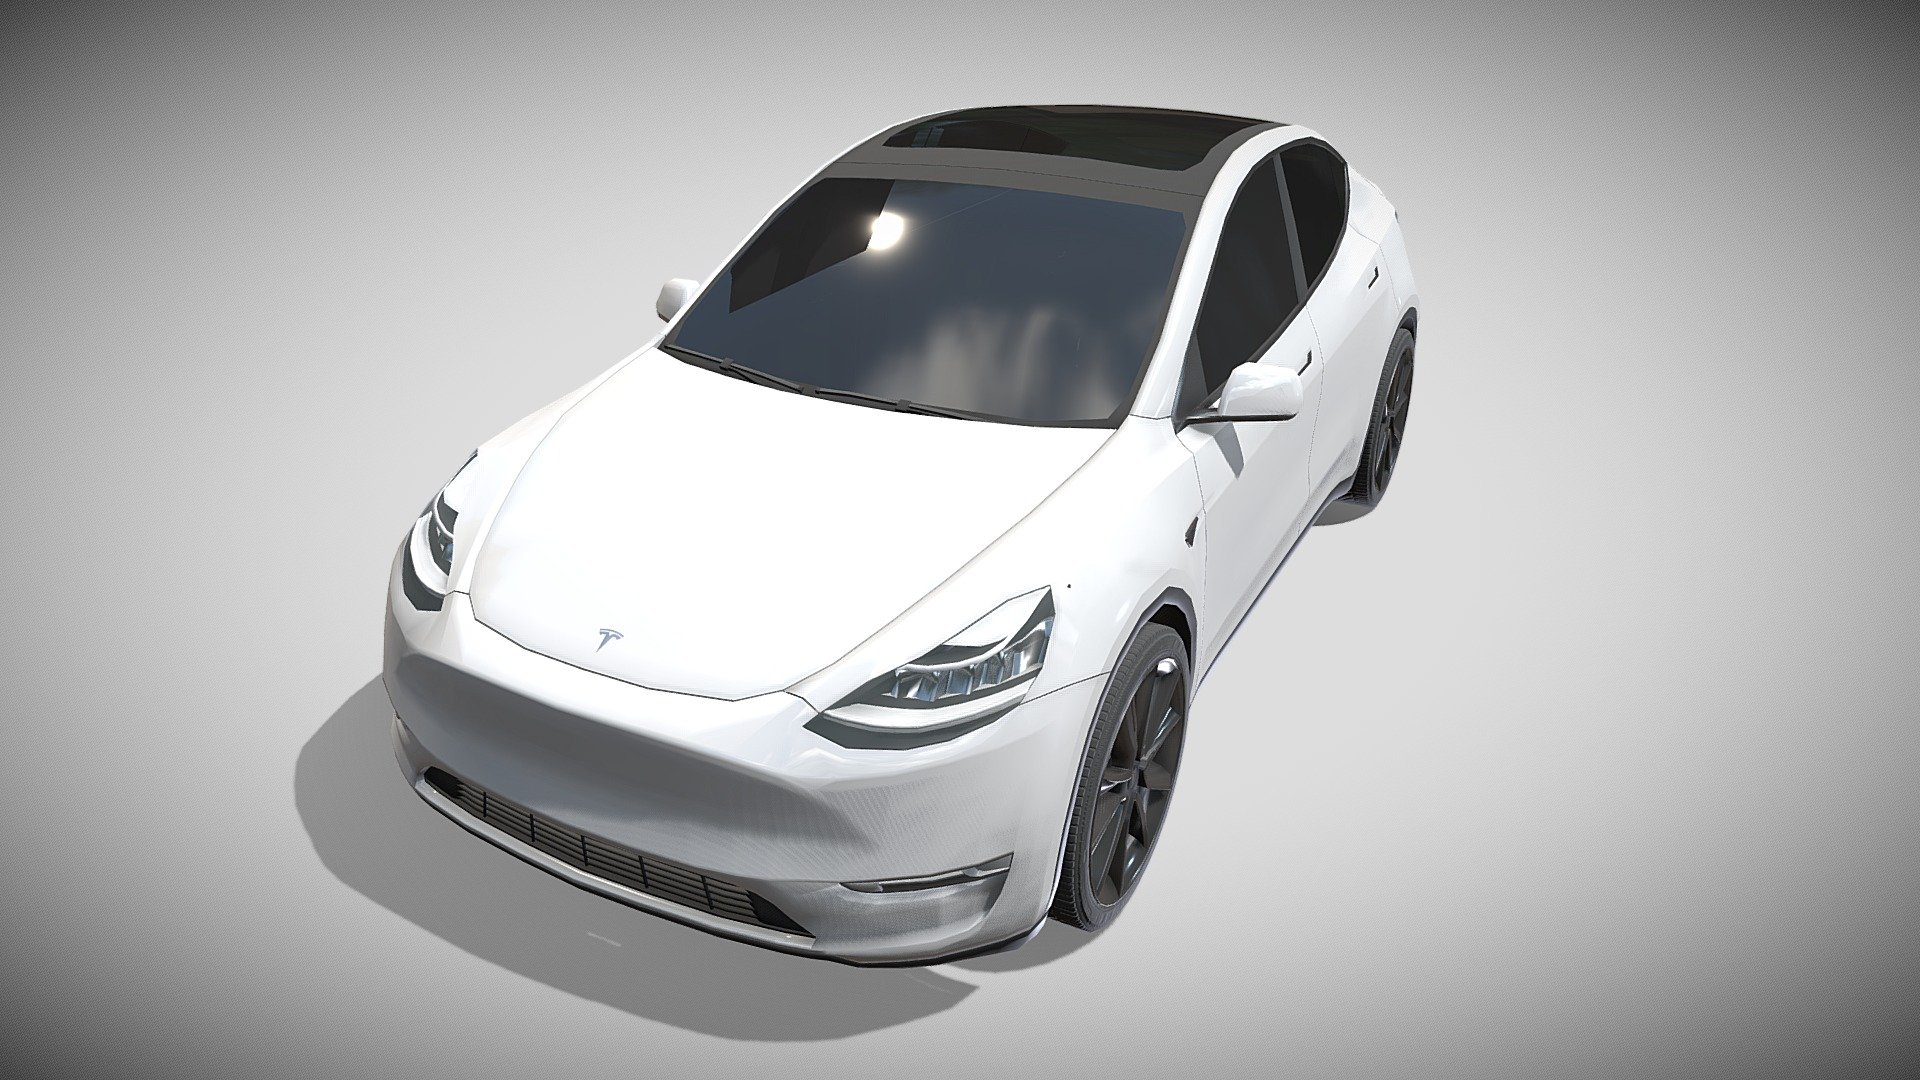 Tesla Model Y AWD with full chassis (battery pack, 2 motor setup, brakes, linkages, suspension, steering) 3d model rendered with Cycles in Blender, as per seen on attached images.

File formats:
-.blend, rendered with cycles, as seen in the images;
-.blend, rendered with cycles, with a see-through of the chassis, as seen in the images;
-.obj, with materials applied;
-.dae, with materials applied;
-.fbx, with material slots applied;
-.stl;

Files come named appropriately and split by file format.

3D Software:
The 3D model was originally created in Blender 2.79 and rendered with Cycles.

Materials and textures:
The models have materials applied in all formats, and are ready to import and render.
The models come with two png textures.

Preview scenes:
The preview images are rendered in Blender using its built-in render engine &lsquo;Cycles' 3d model